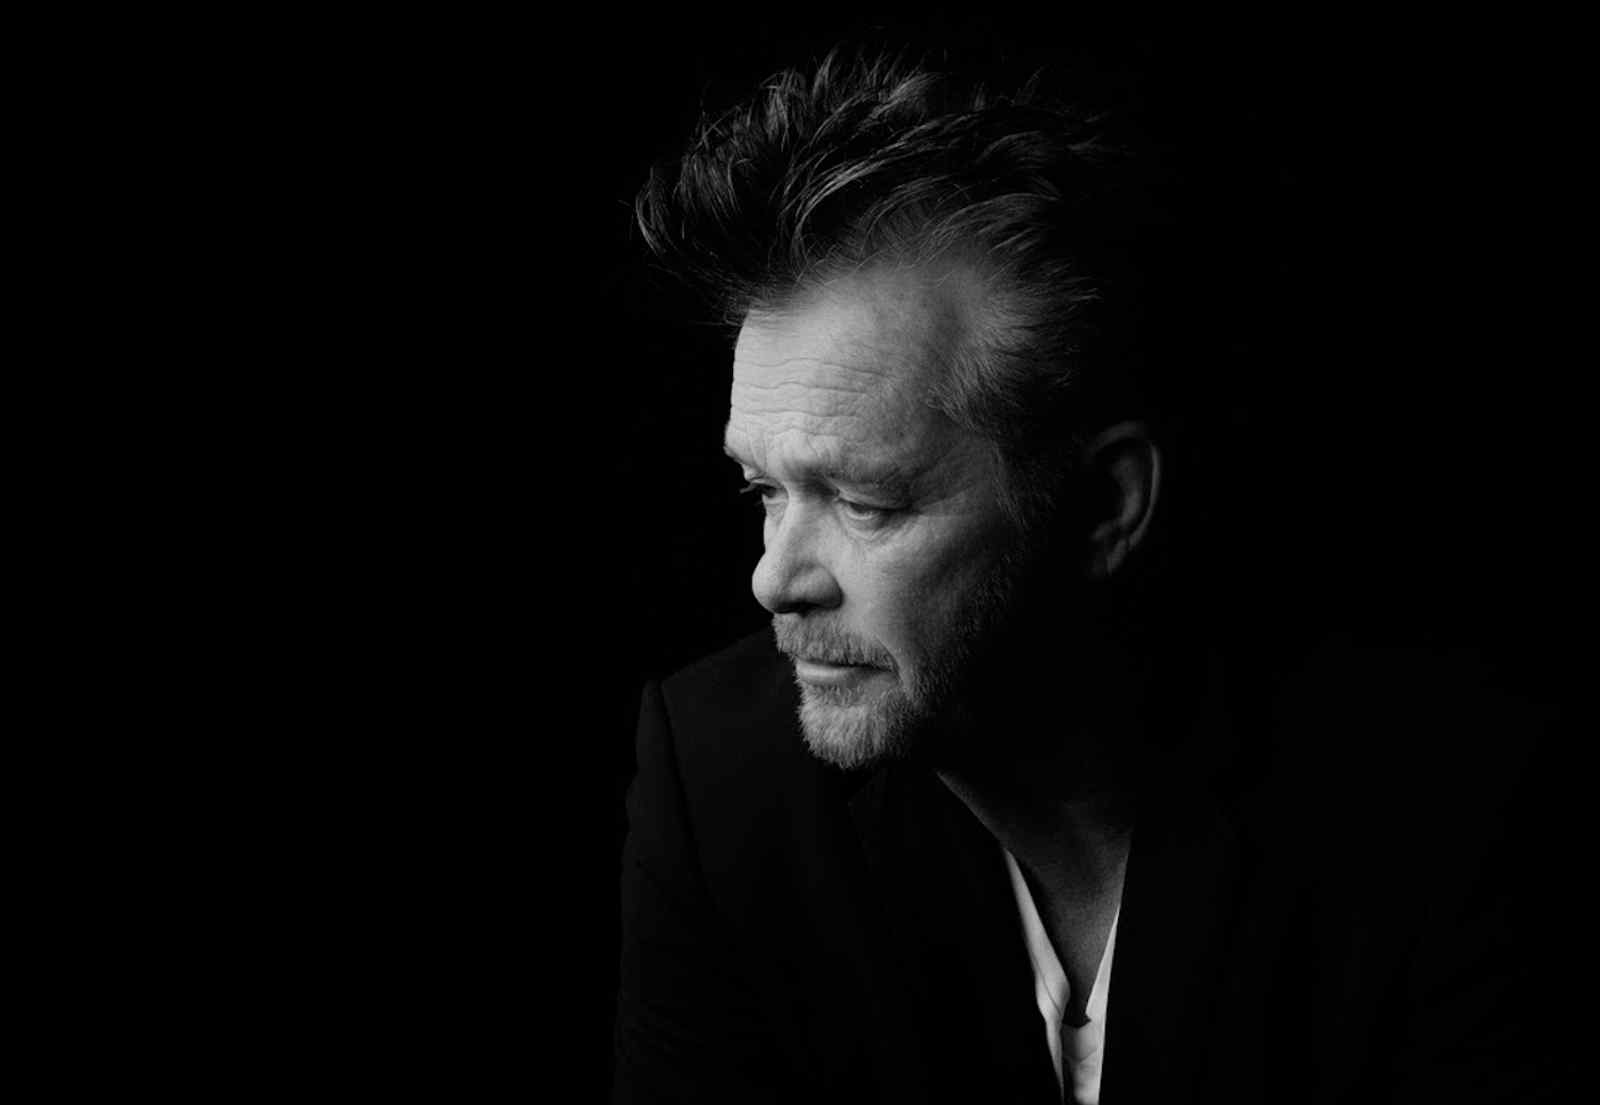 John Mellencamp’s sold out Live and In Person Tour on June 13 at the Palace Theater in Albany is cancelled.